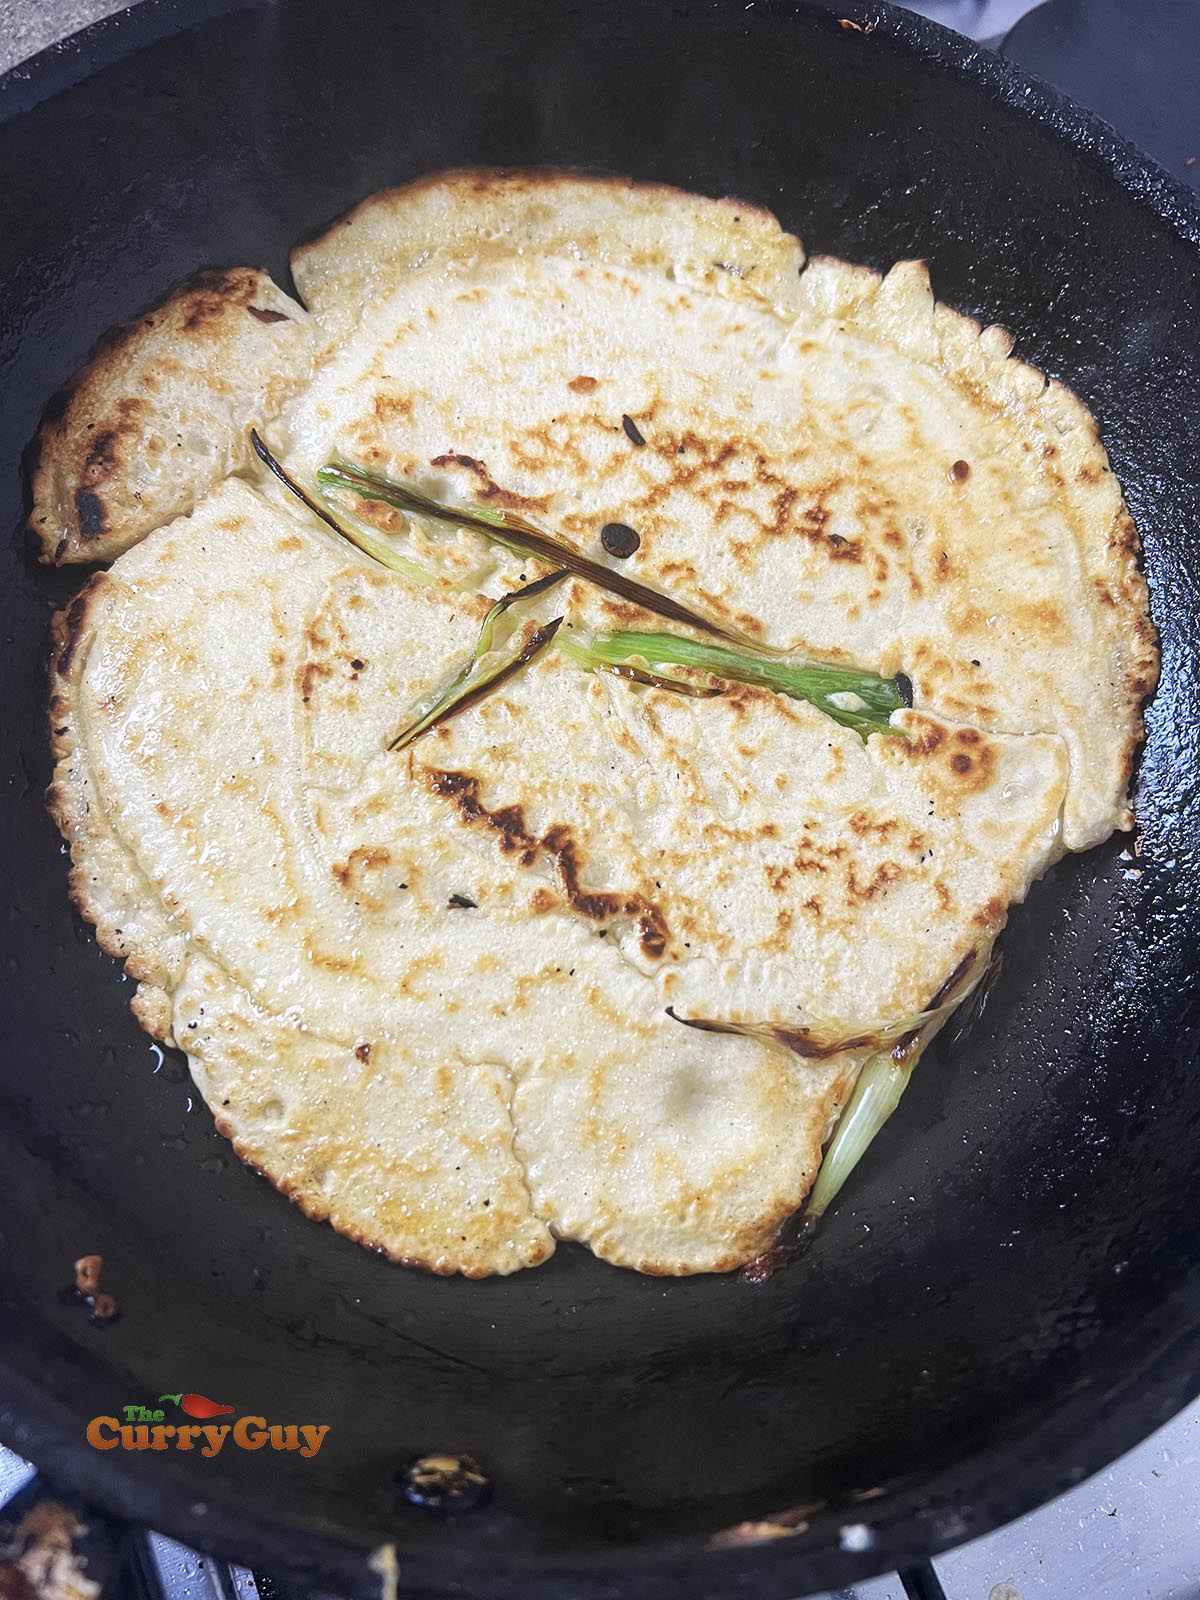 Korean pancake flipped over to cook the other side.